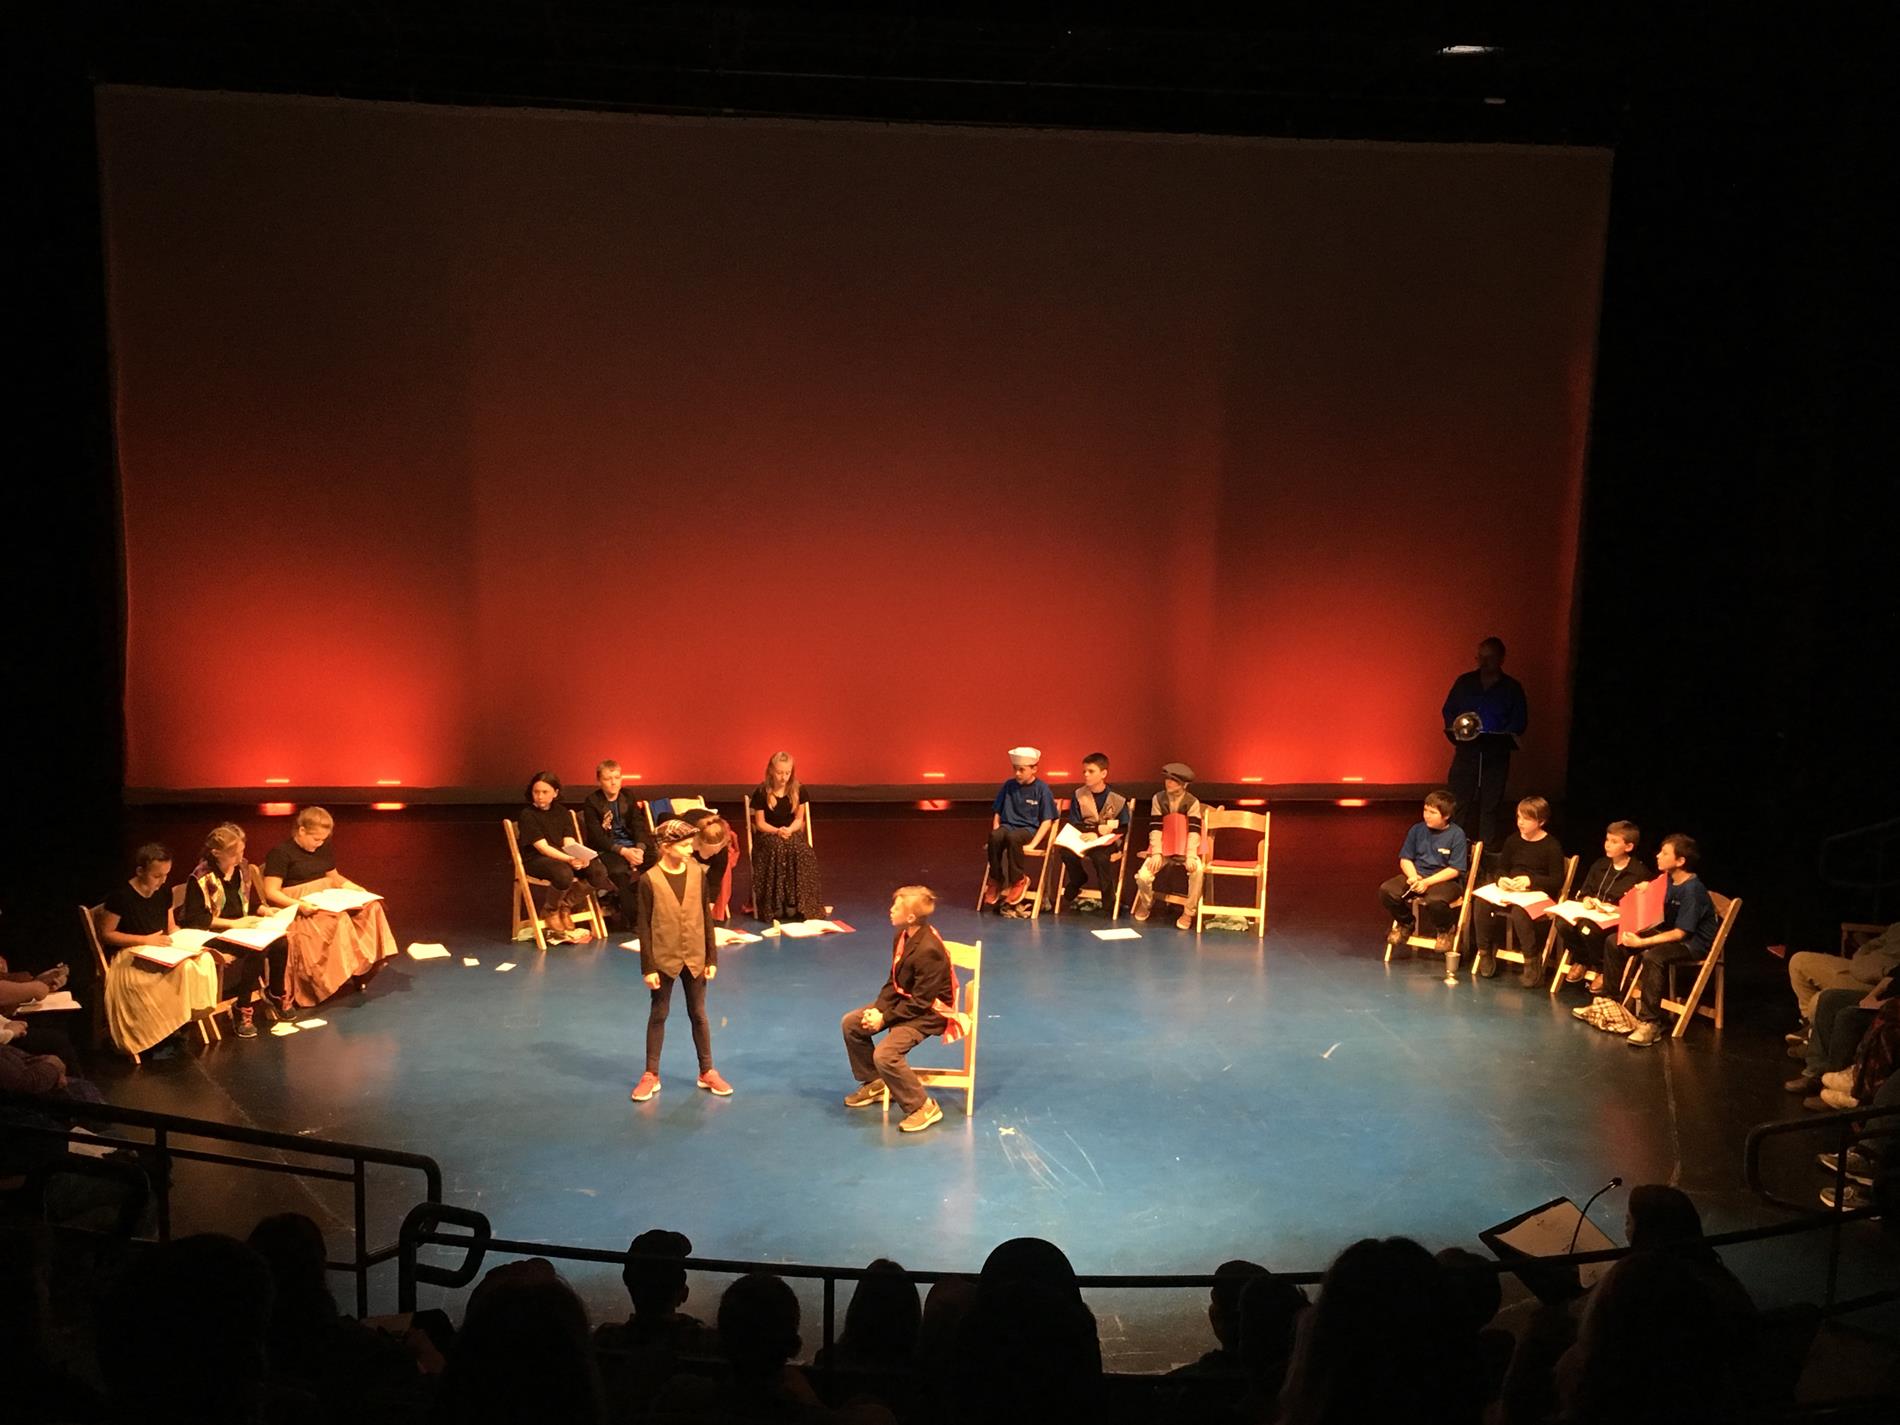 Students Performing at the Northern State Theater